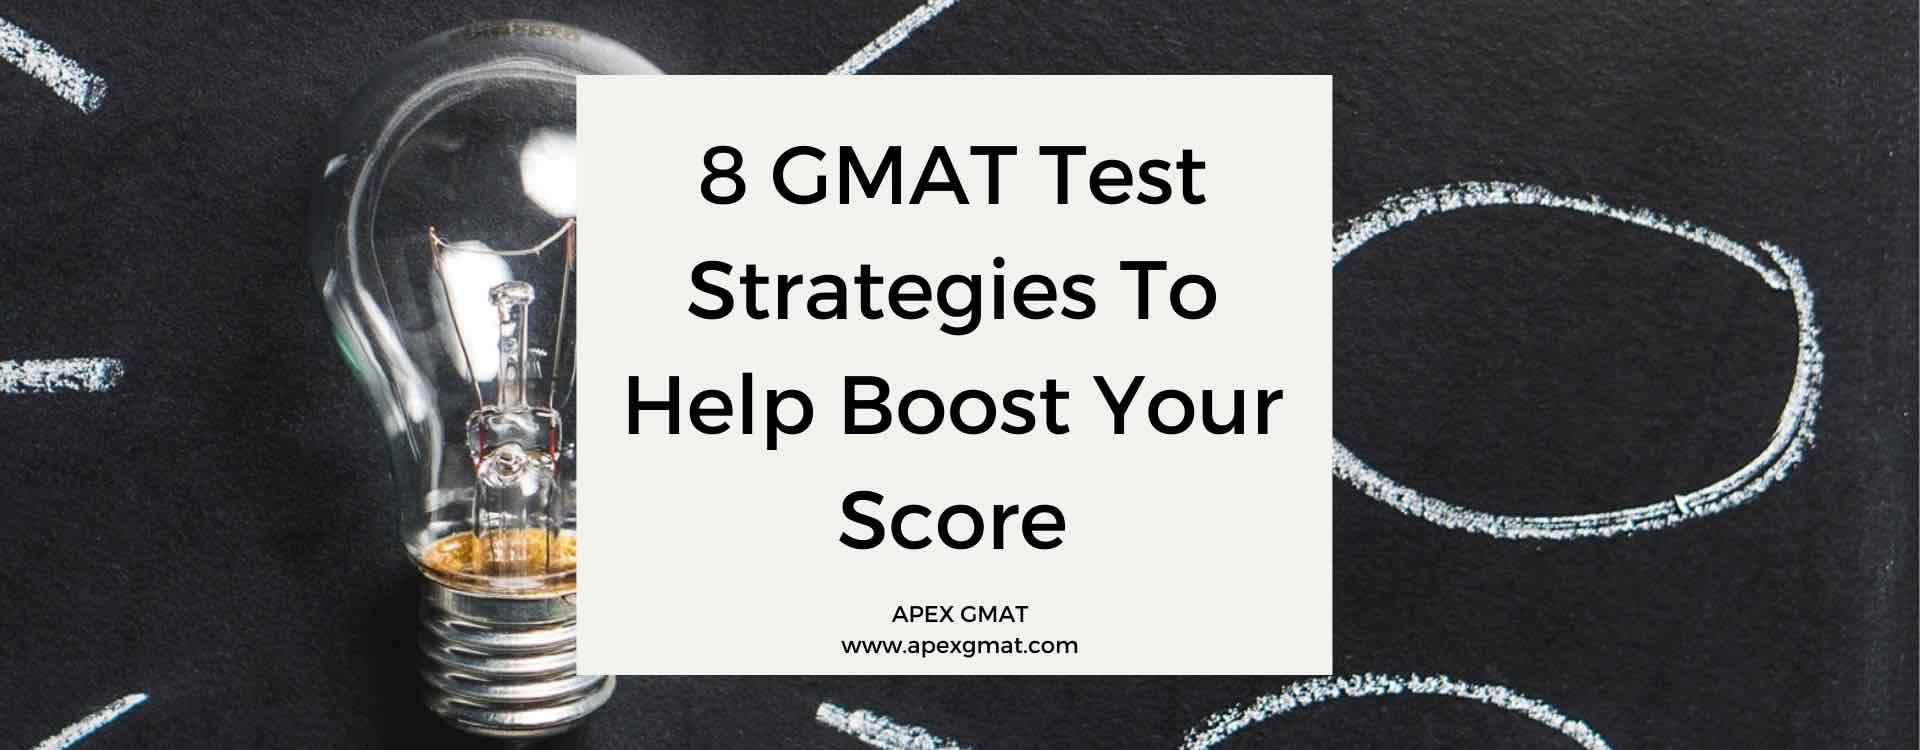 8 GMAT Test Strategies To Help Boost Your Score